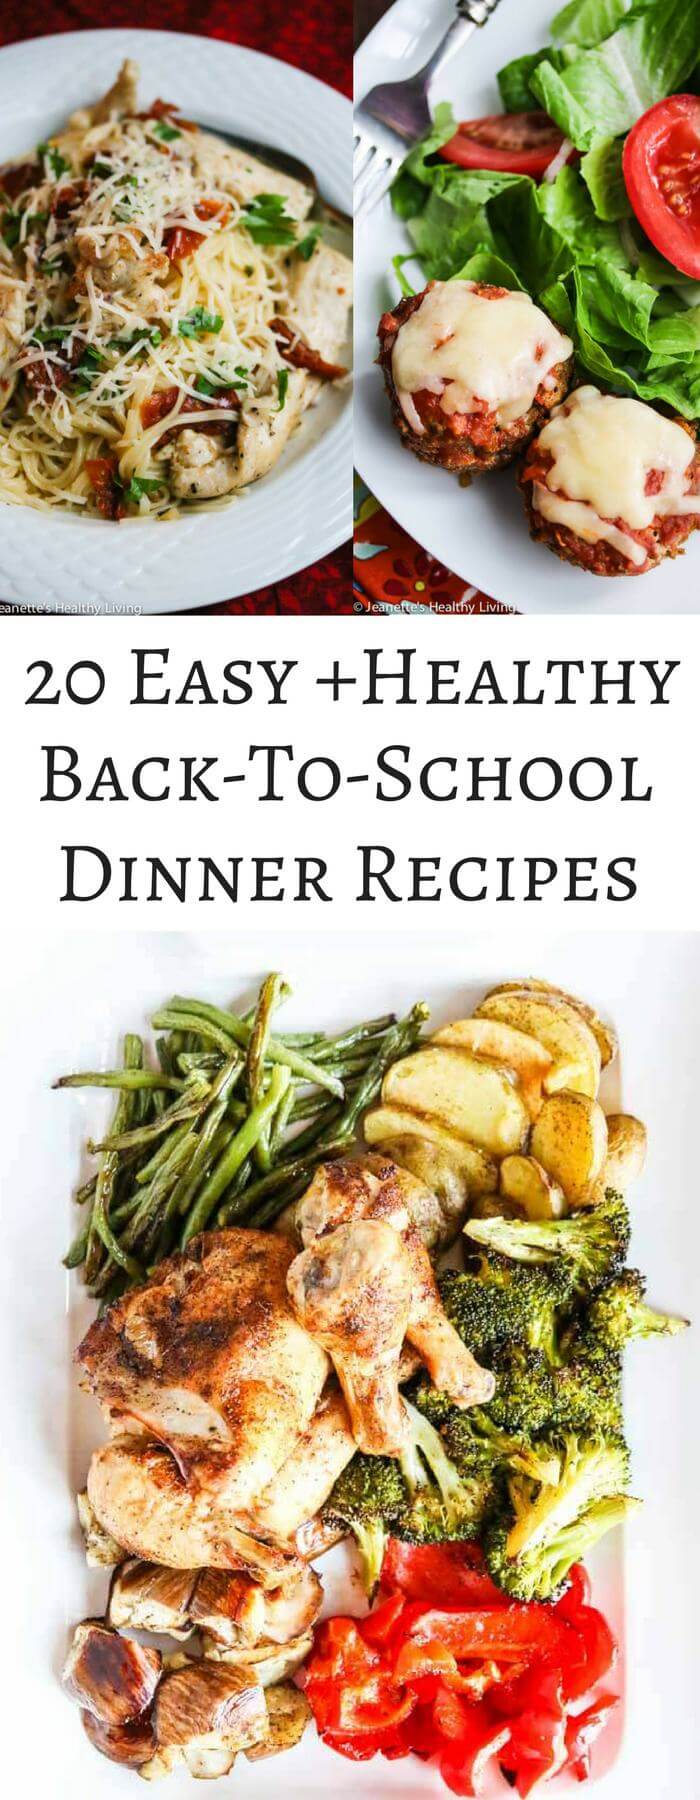 20 Easy Healthy Back-To-School Dinner Recipes - Jeanette's ...